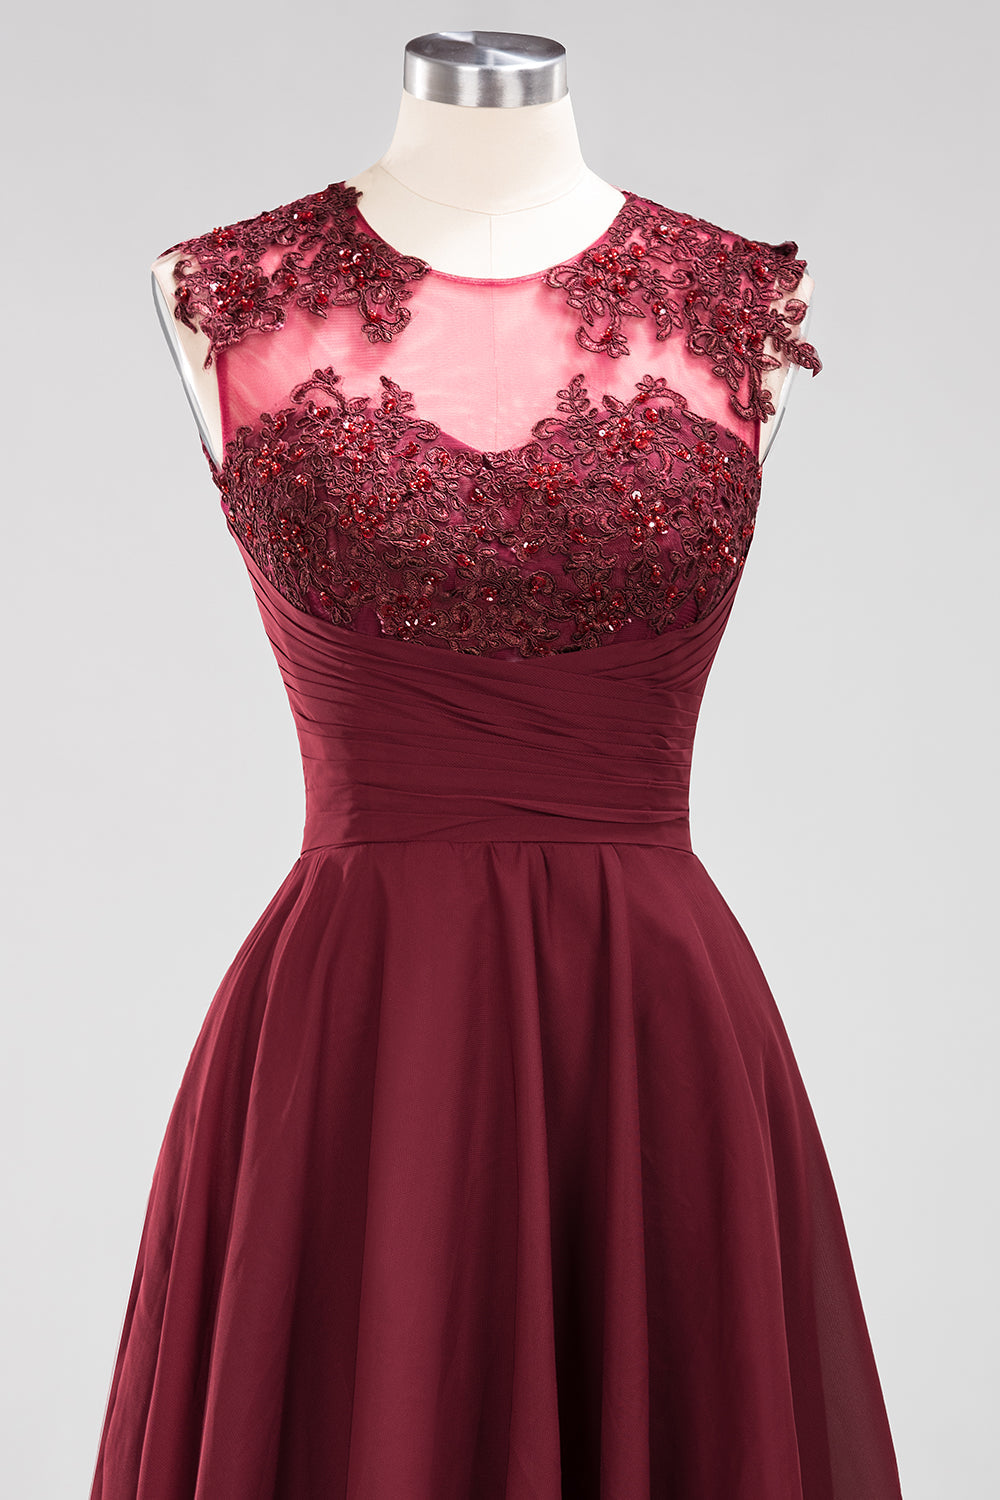 Cute Chiffon Round Neck Short Burgundy Bridesmaid Dresses with Appliques